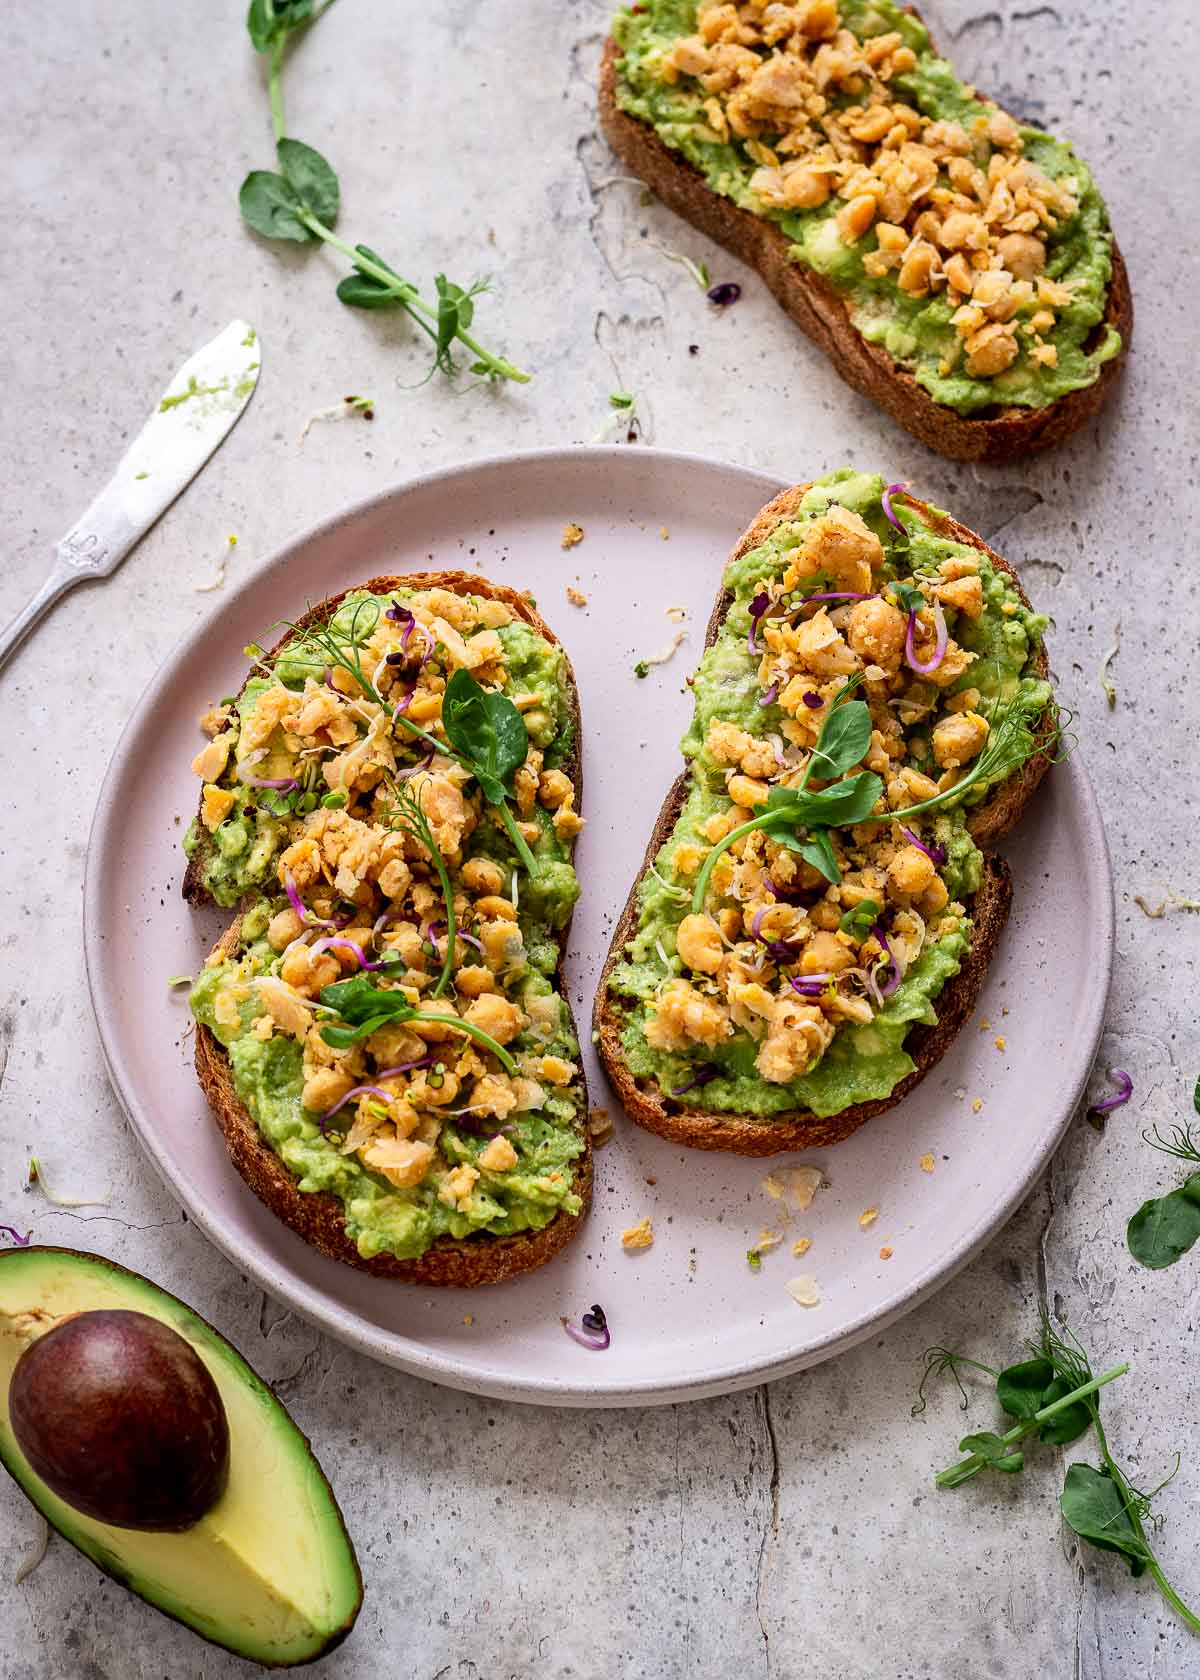 High protein vegan avocado toast on a pink plate with chickpeas, pea shoots and sprouts.